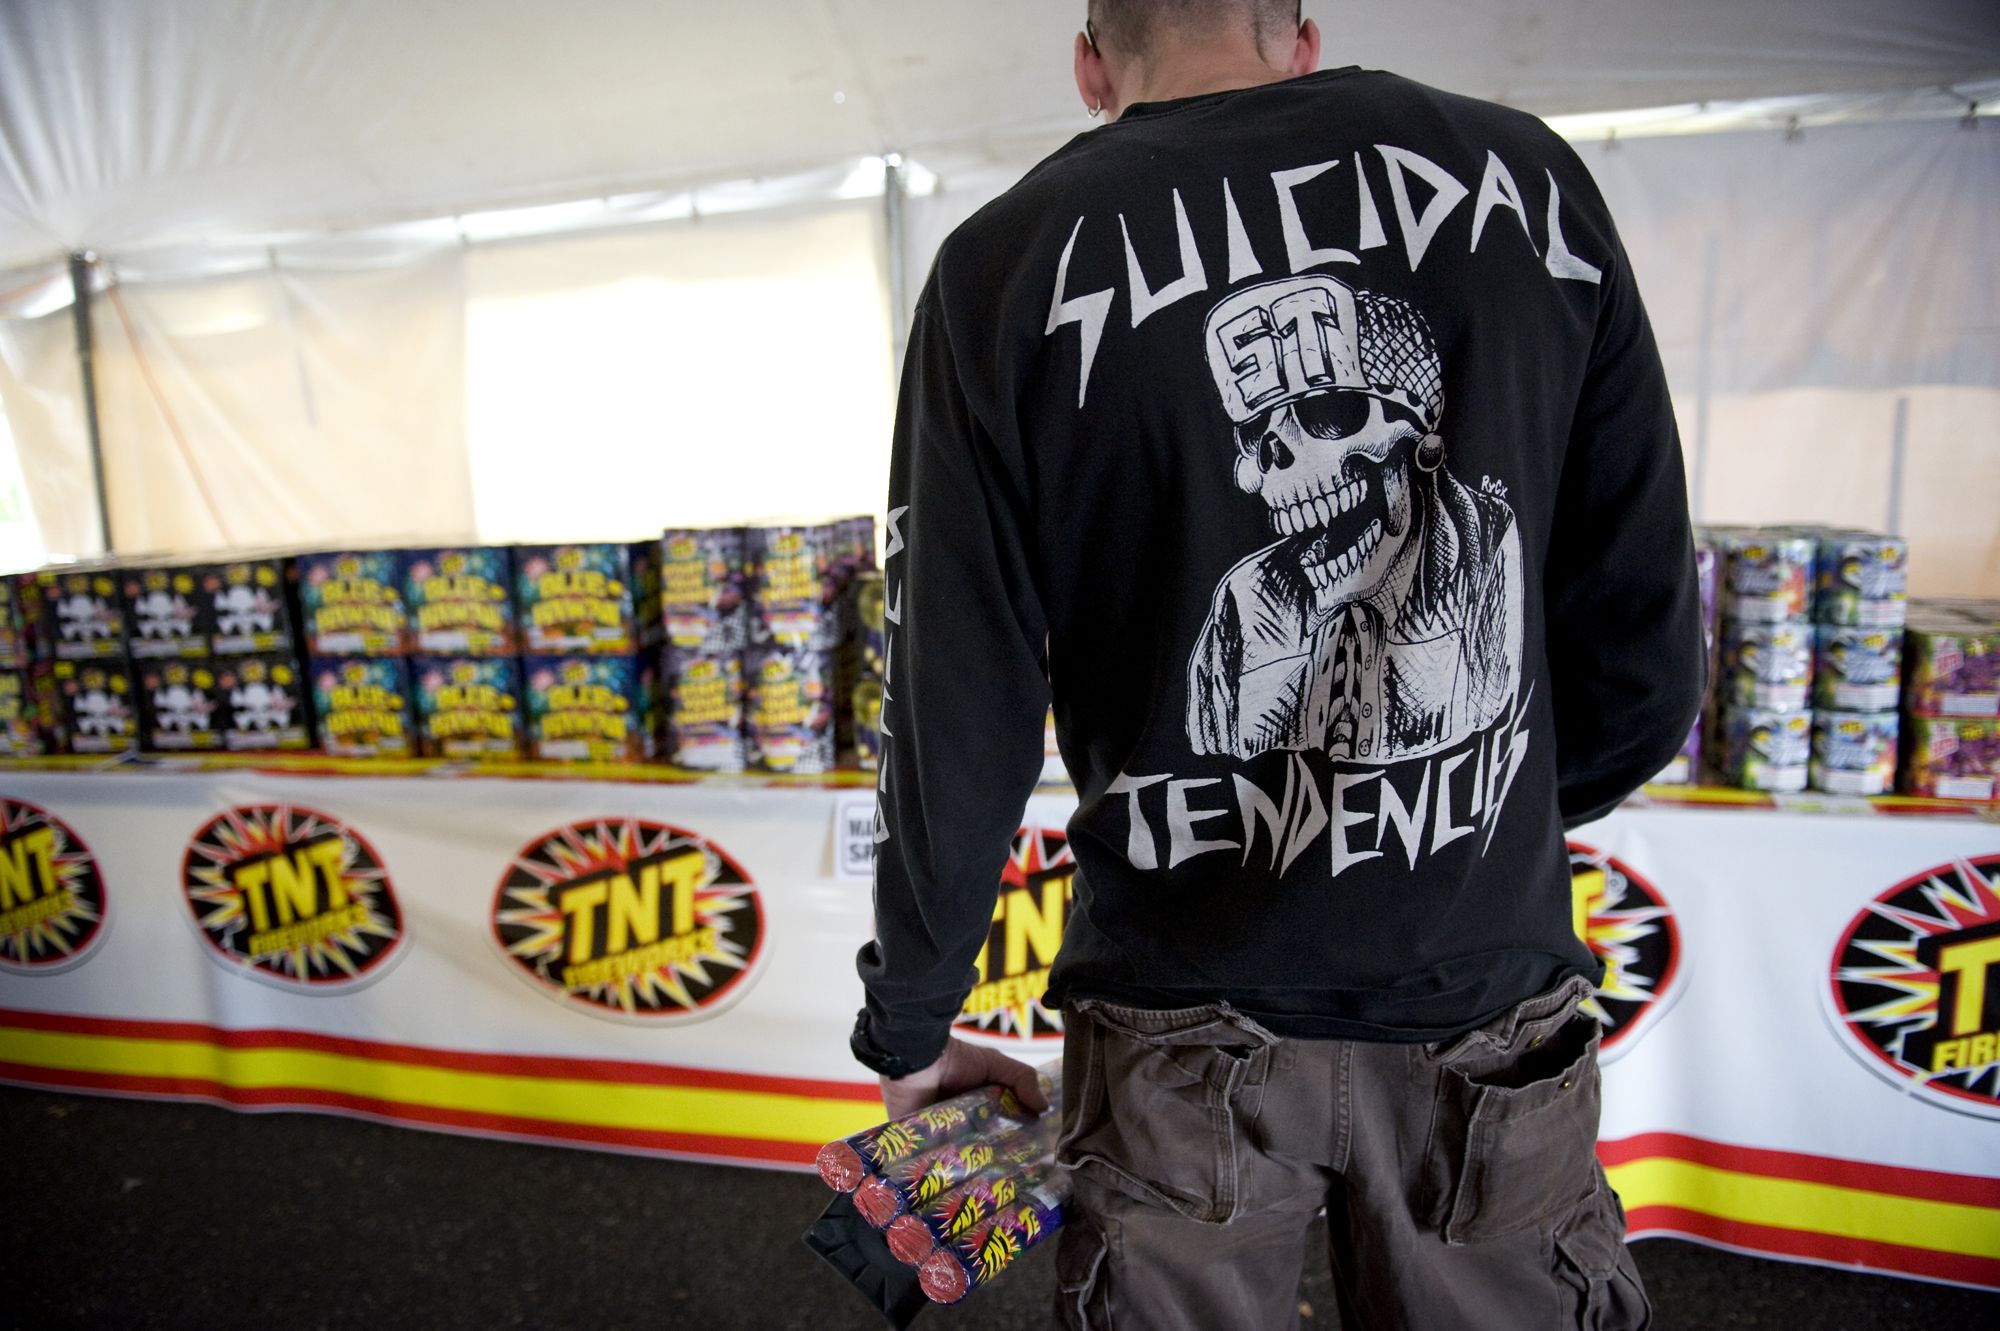 Renne Carter, 41, of Portland made the trip across the Columbia River to buy fireworks at the TNT Fireworks booth in 2010.